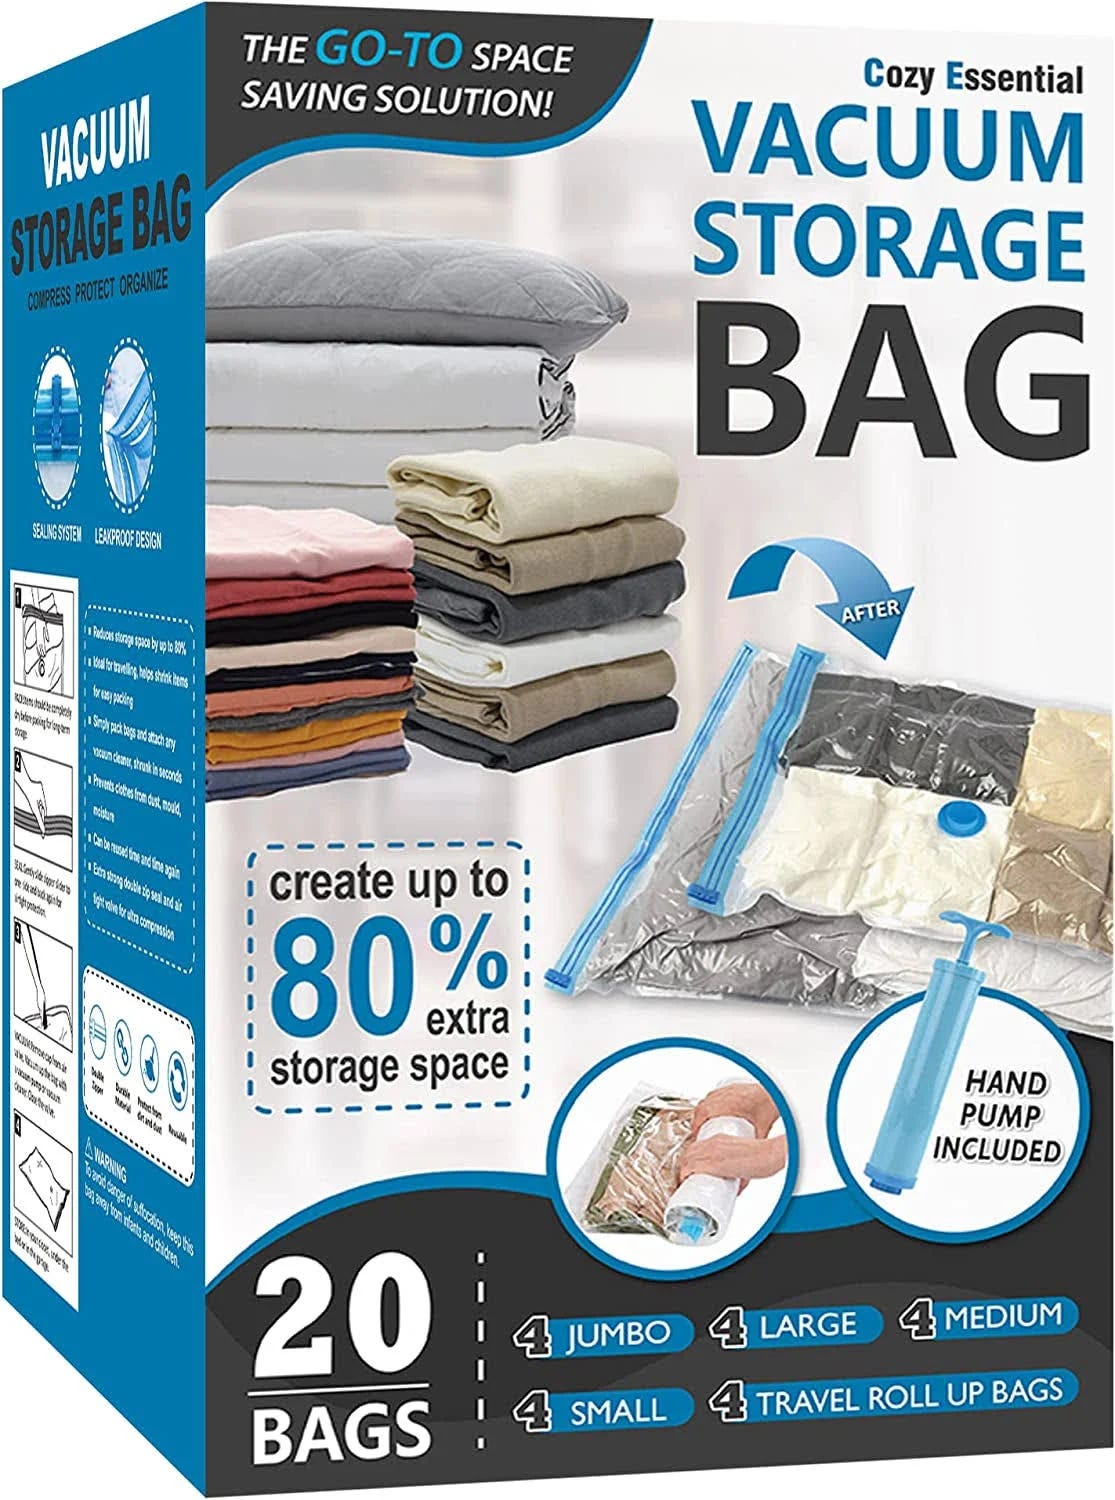 Cozy Essential 20 Pack Vacuum Storage Bags: Space-Saving Compression Bags for Travel and Home Storage | Image